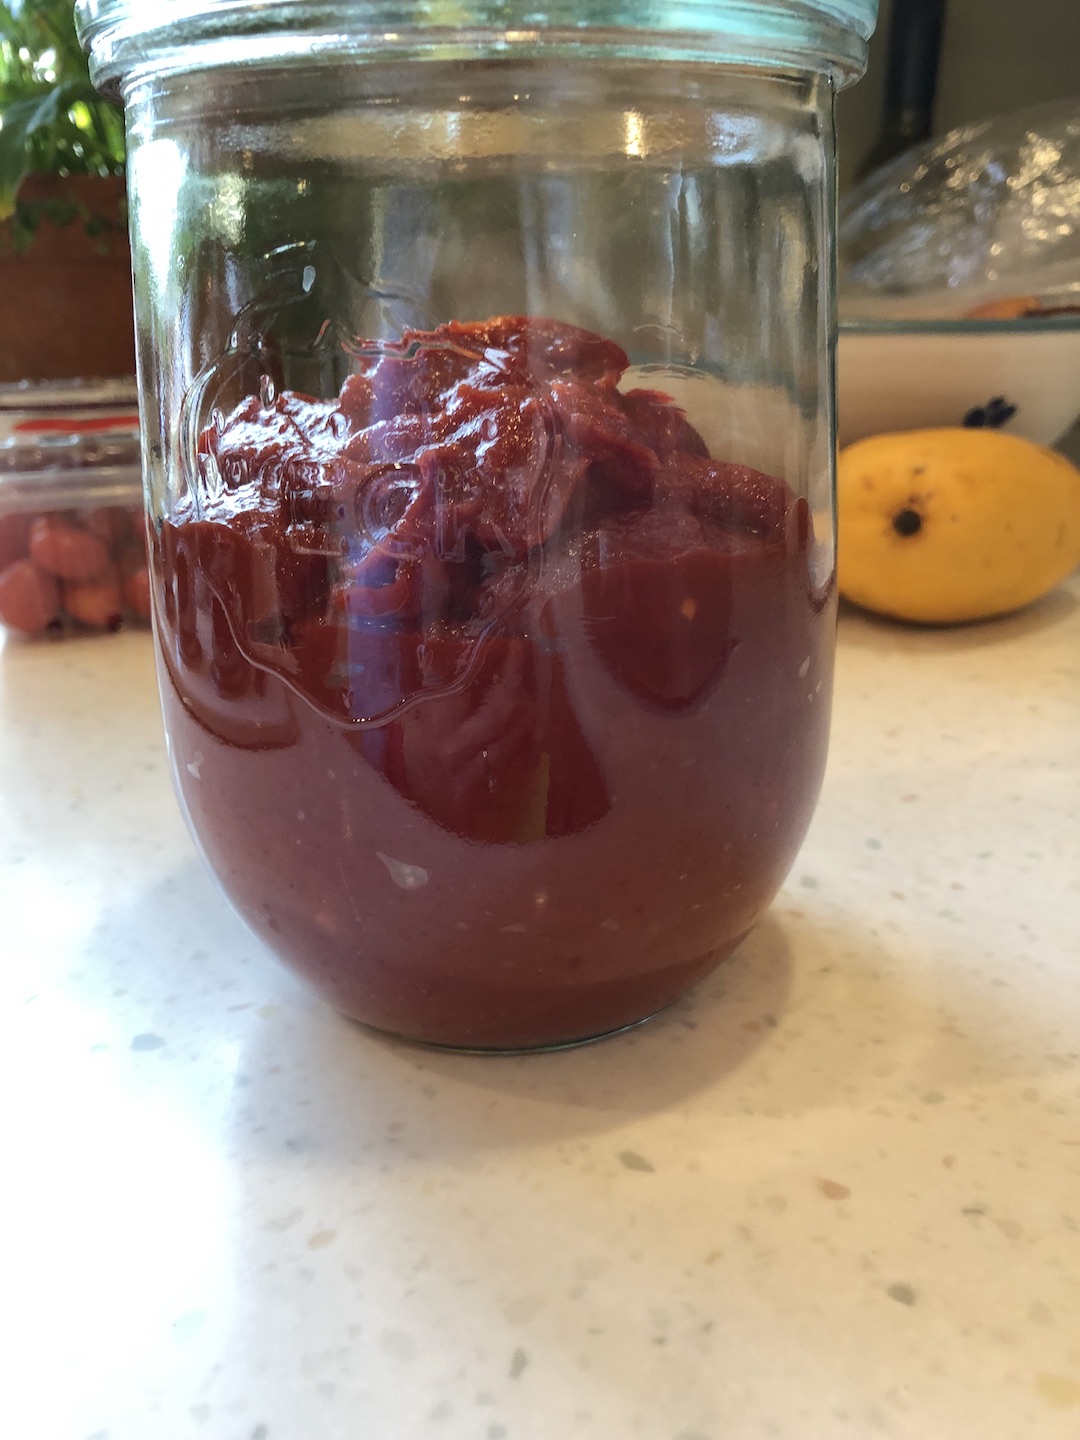 ketchup sitting in a glass jar on the counter fermenting with a mango in the background